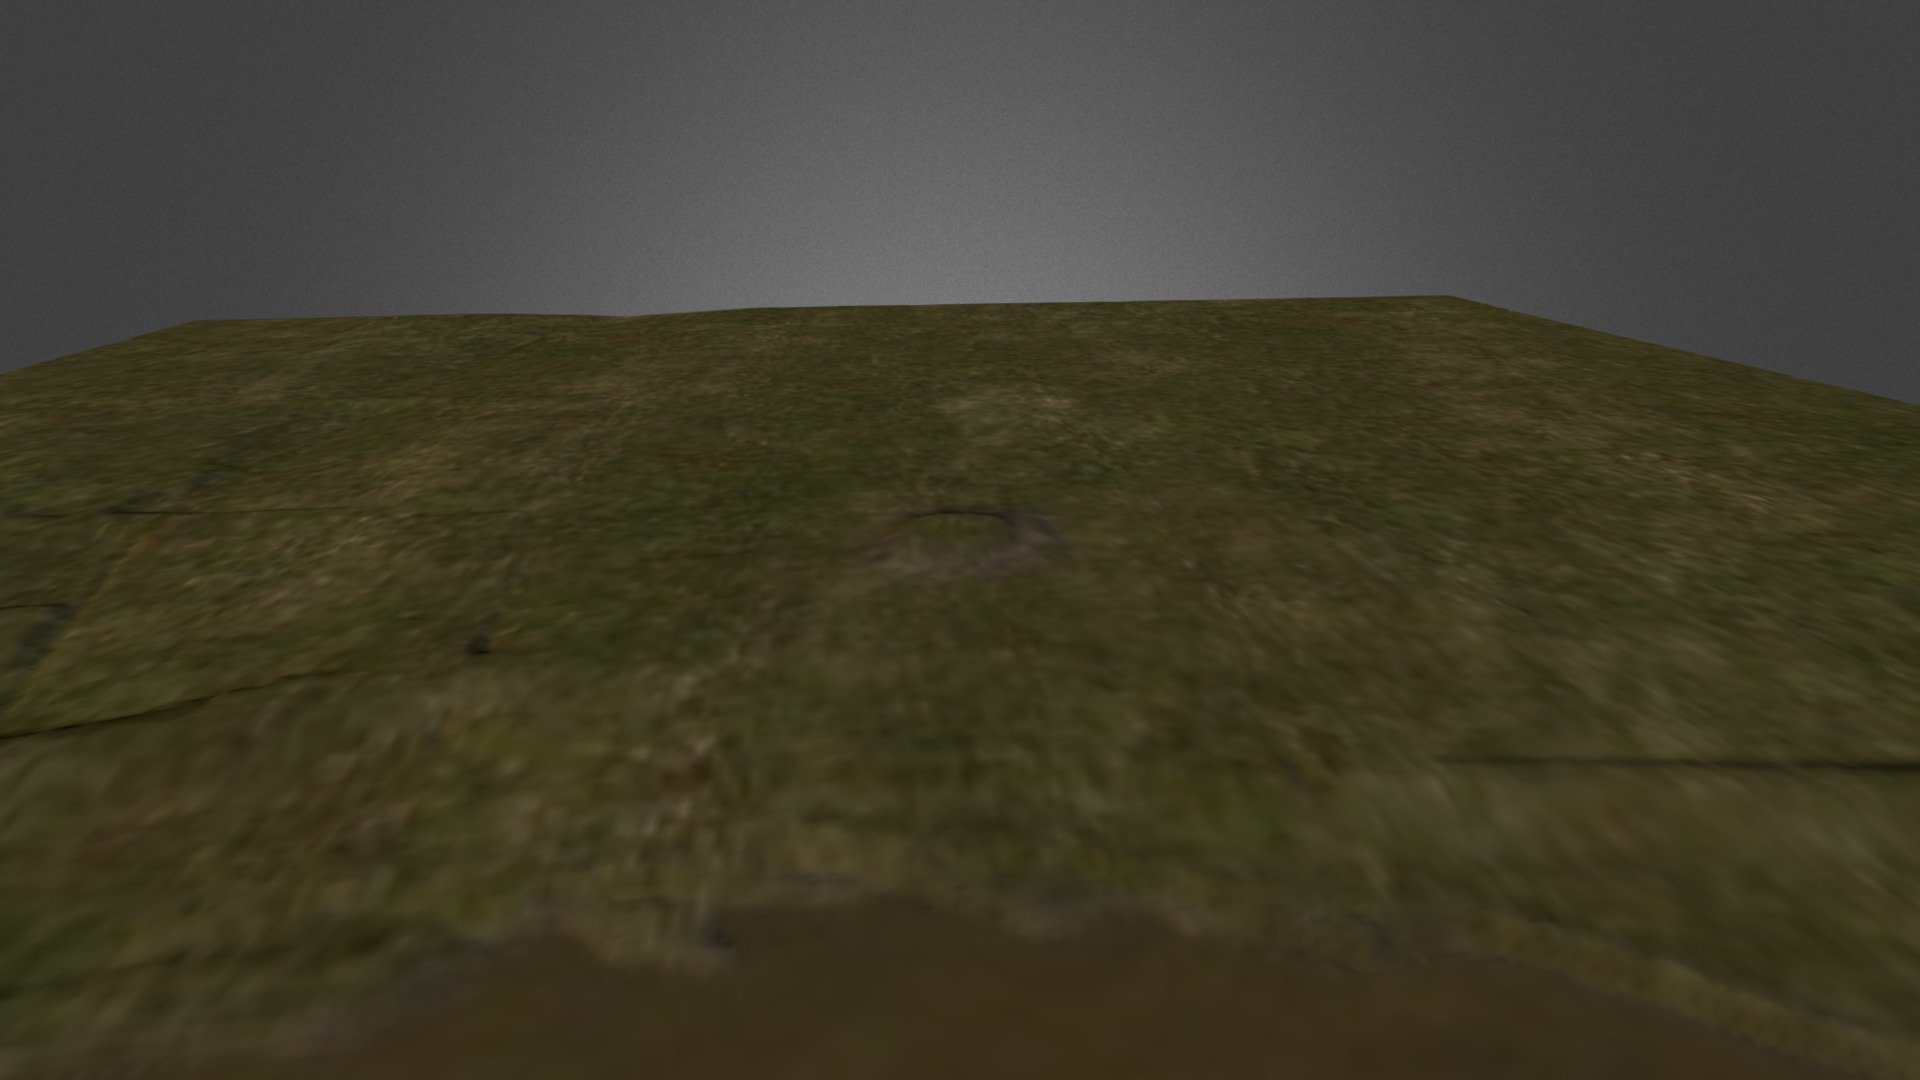 Simple terrain model of Belzoni Mound site in Mississippi. Created in L3DT from DEM data exported from ArcMap 3d model